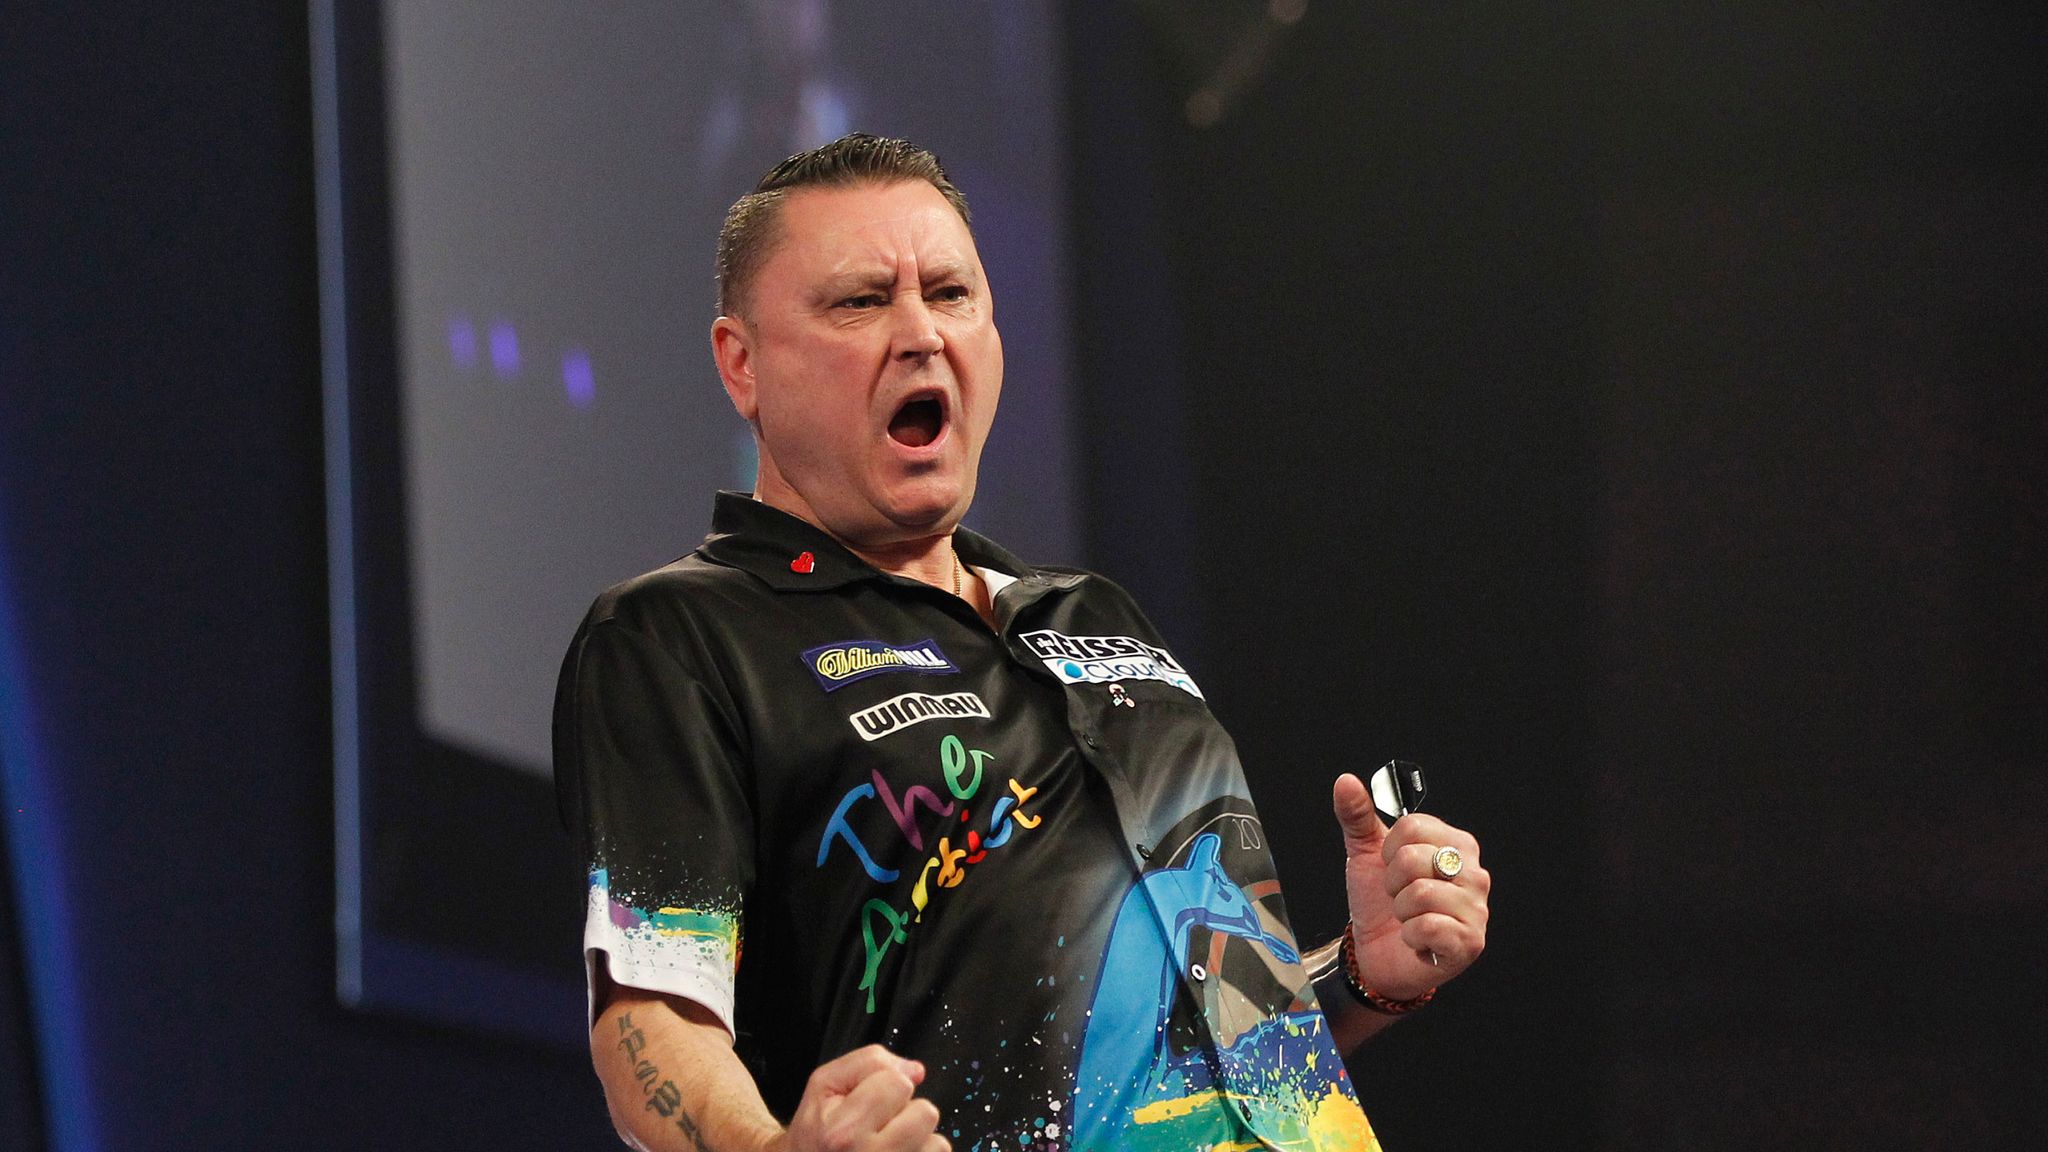 Online Darts Live League Phase 3 Week 2, Results and How to Watch